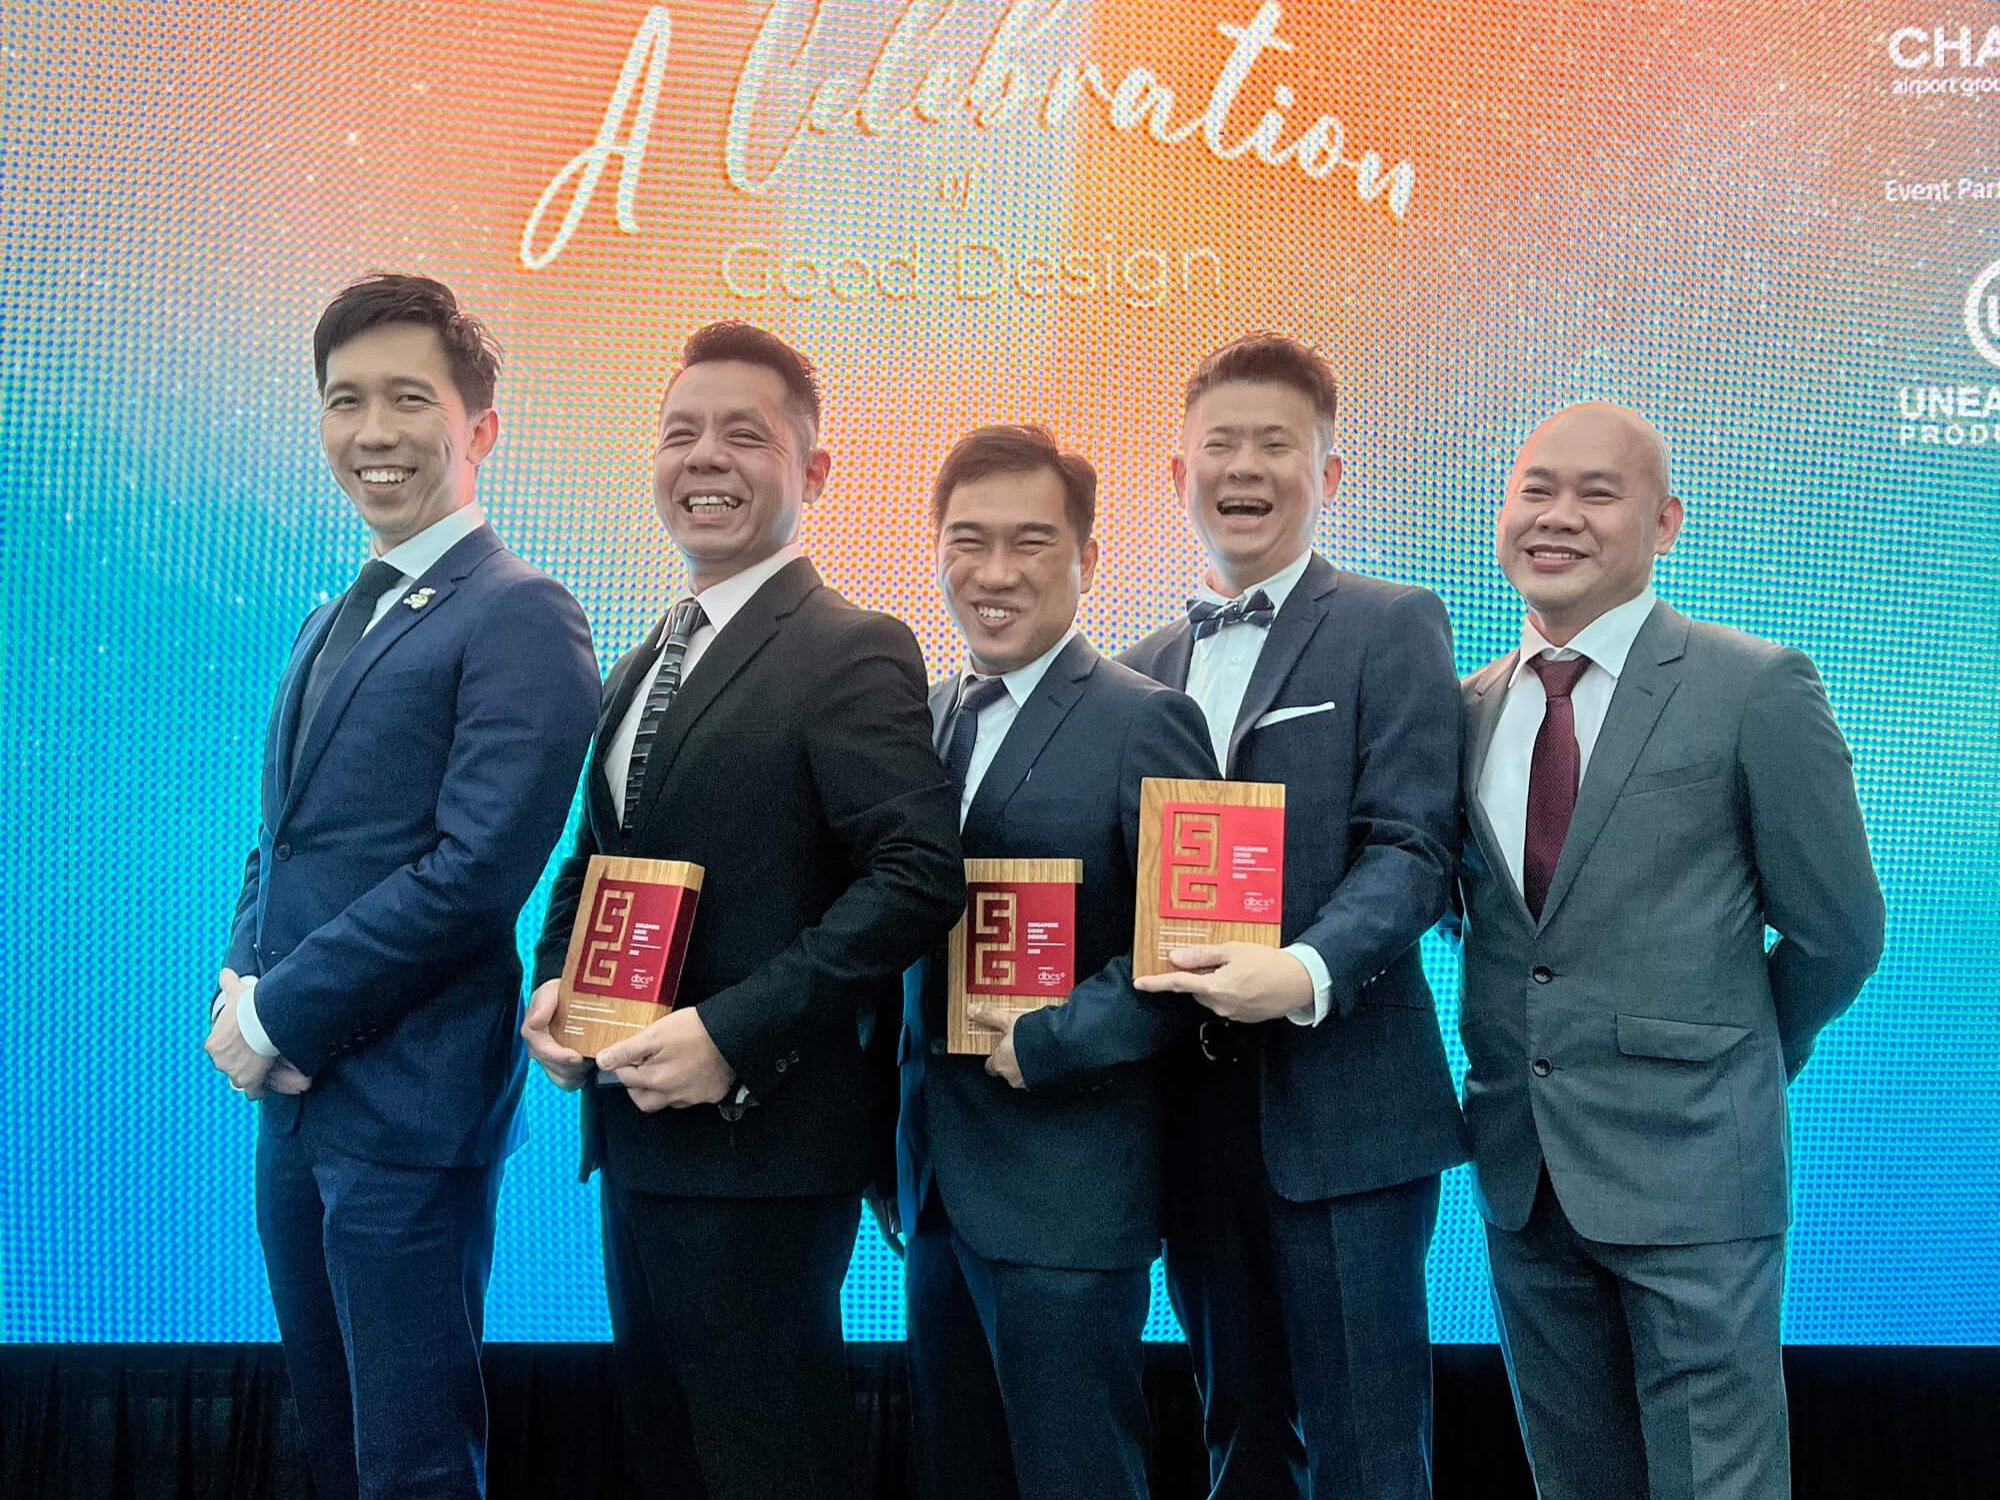  All smiles from the Conexus gents: (L to R) Managing Director Brendan Khor, Senior Project Manager Clarence Tan, Project Manager Jonathan De La Cruz, Associate Director, Associate Director, Project Management Roy Ngai, Design Director Aviruth Trungt